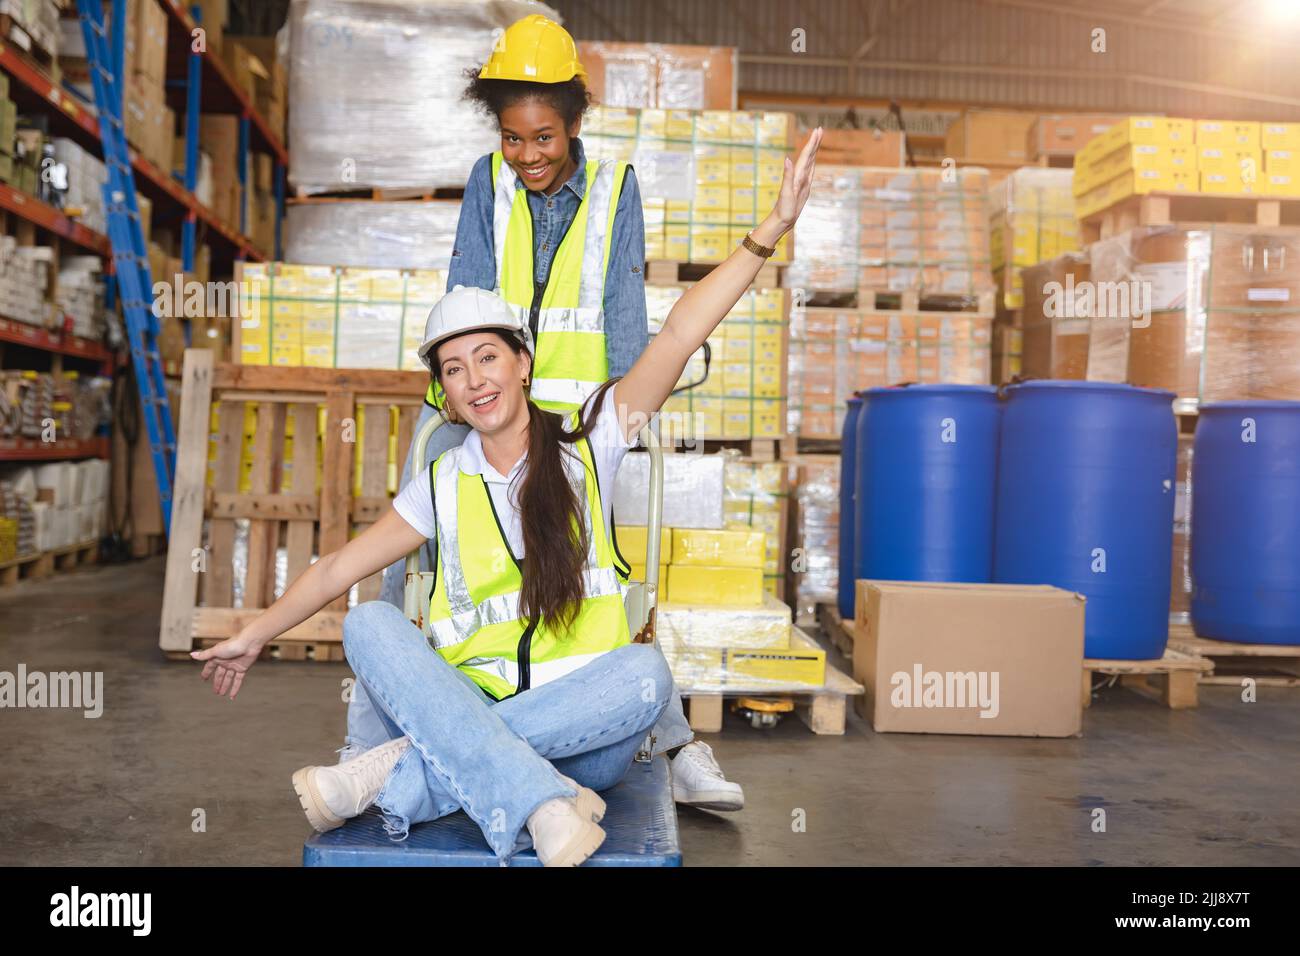 Women warehouse employee worker enjoy working teamwork with friend happy smile at workplace. Stock Photo